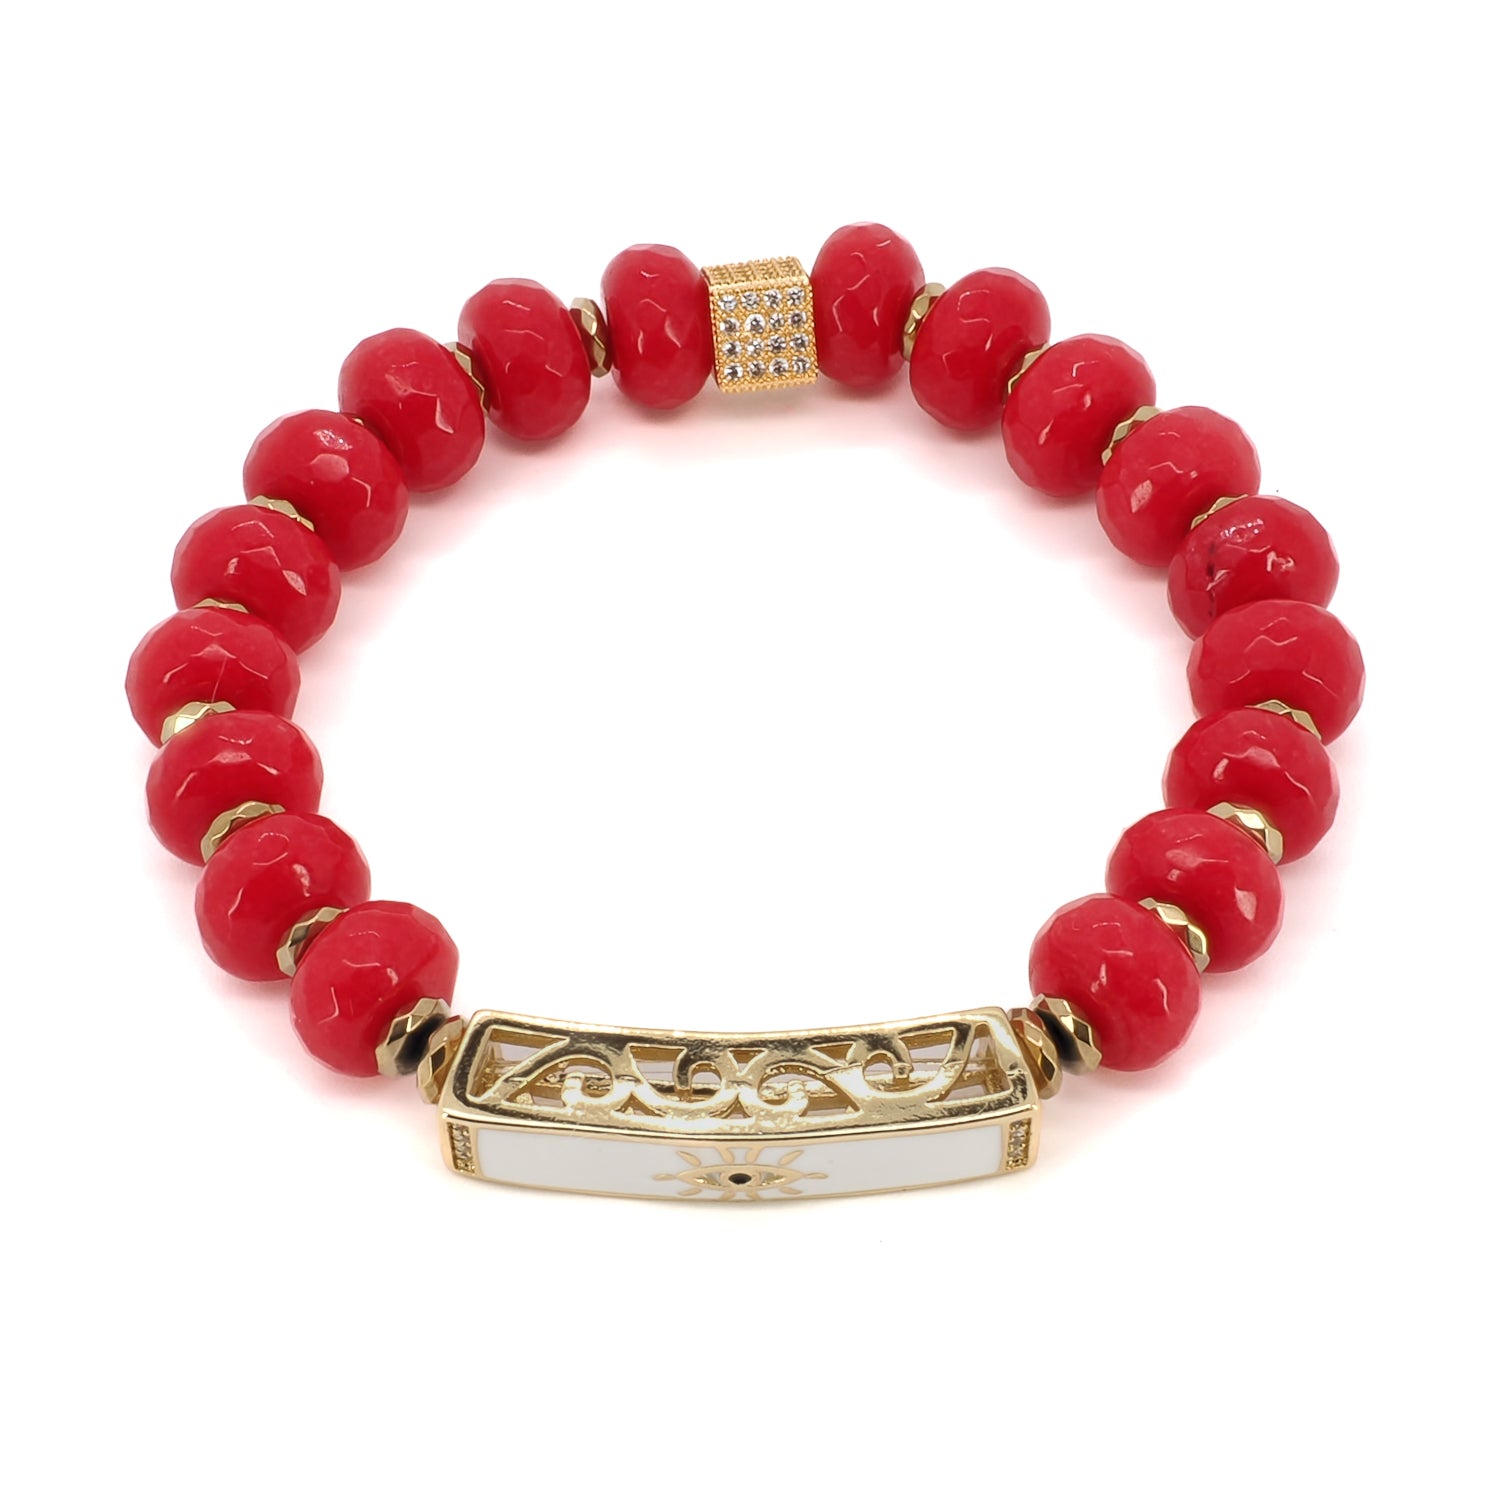 Discover the spiritual and protective power of the Red Energy Evil Eye Bracelet, crafted with red coral stone beads and gold hematite spacers.